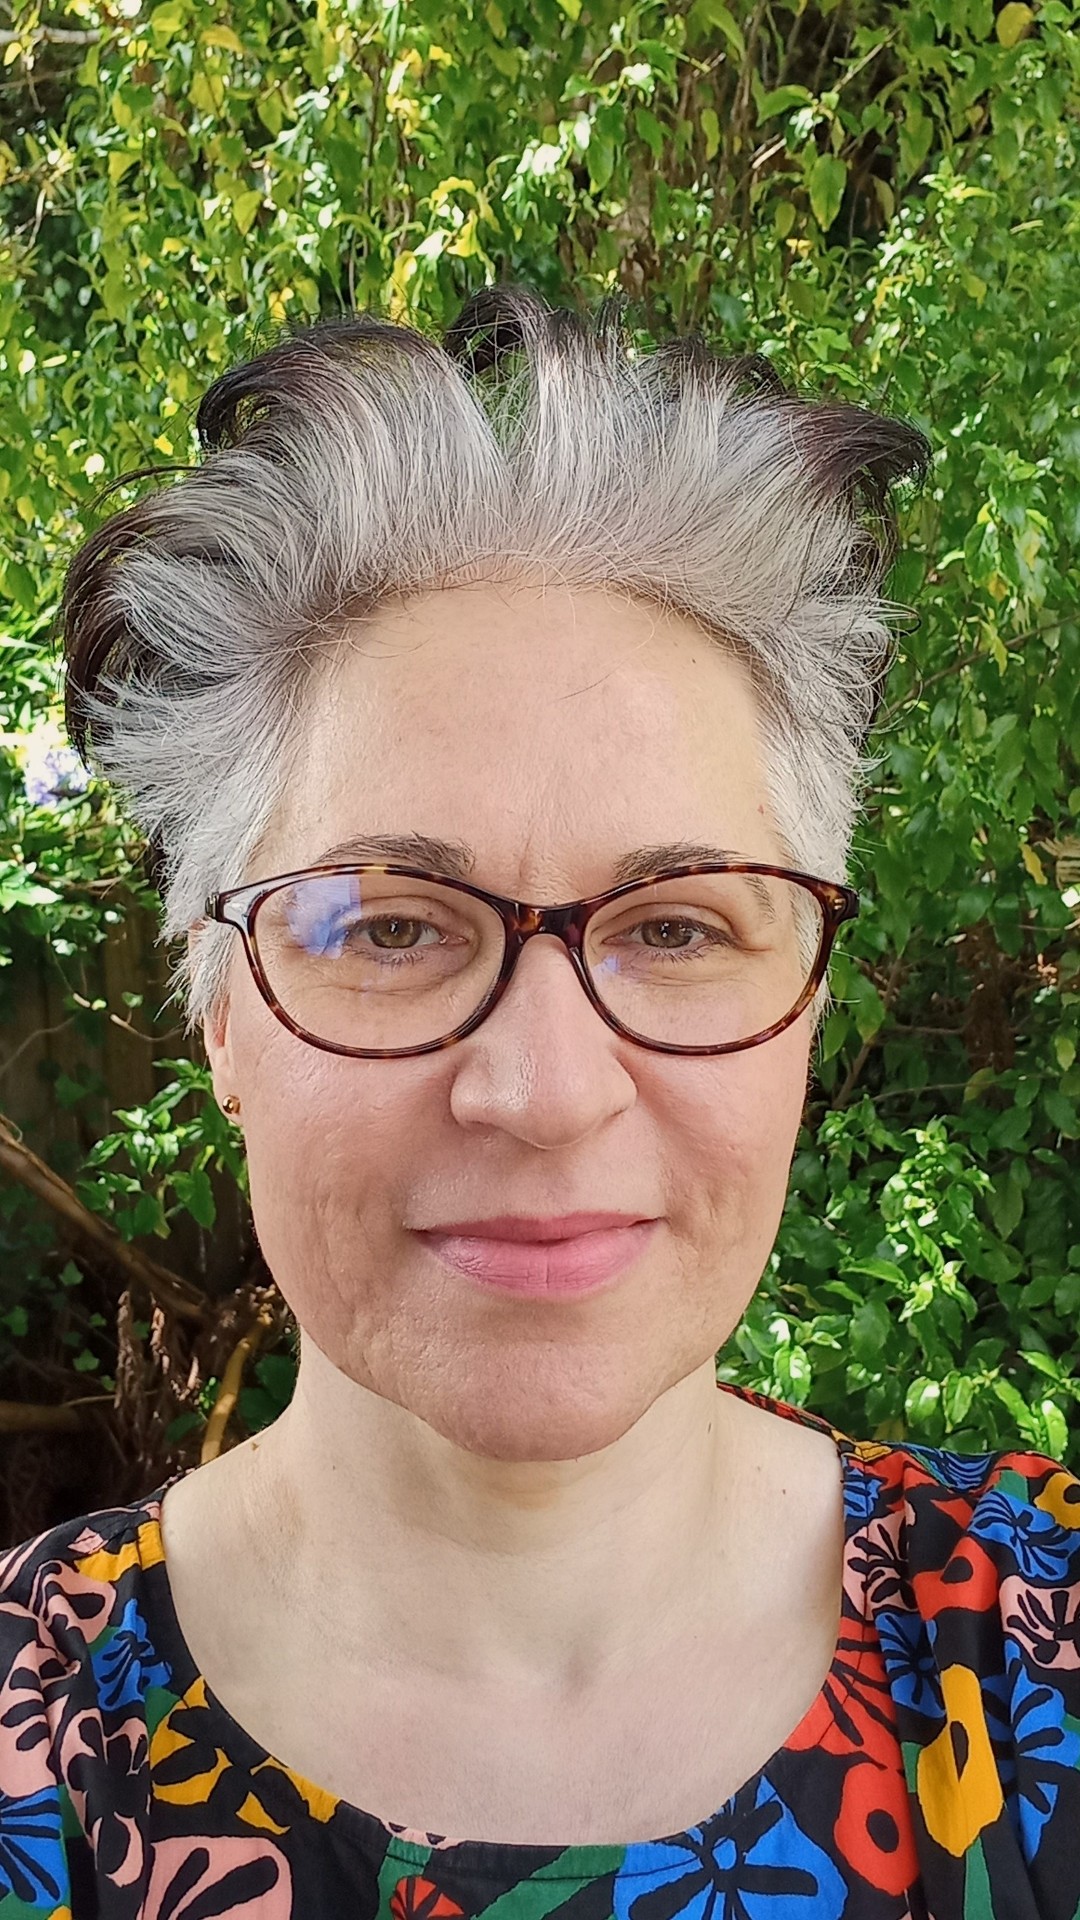 A profile photo of Emina Petrovic, wearing a colourful top, with foliage in the background.